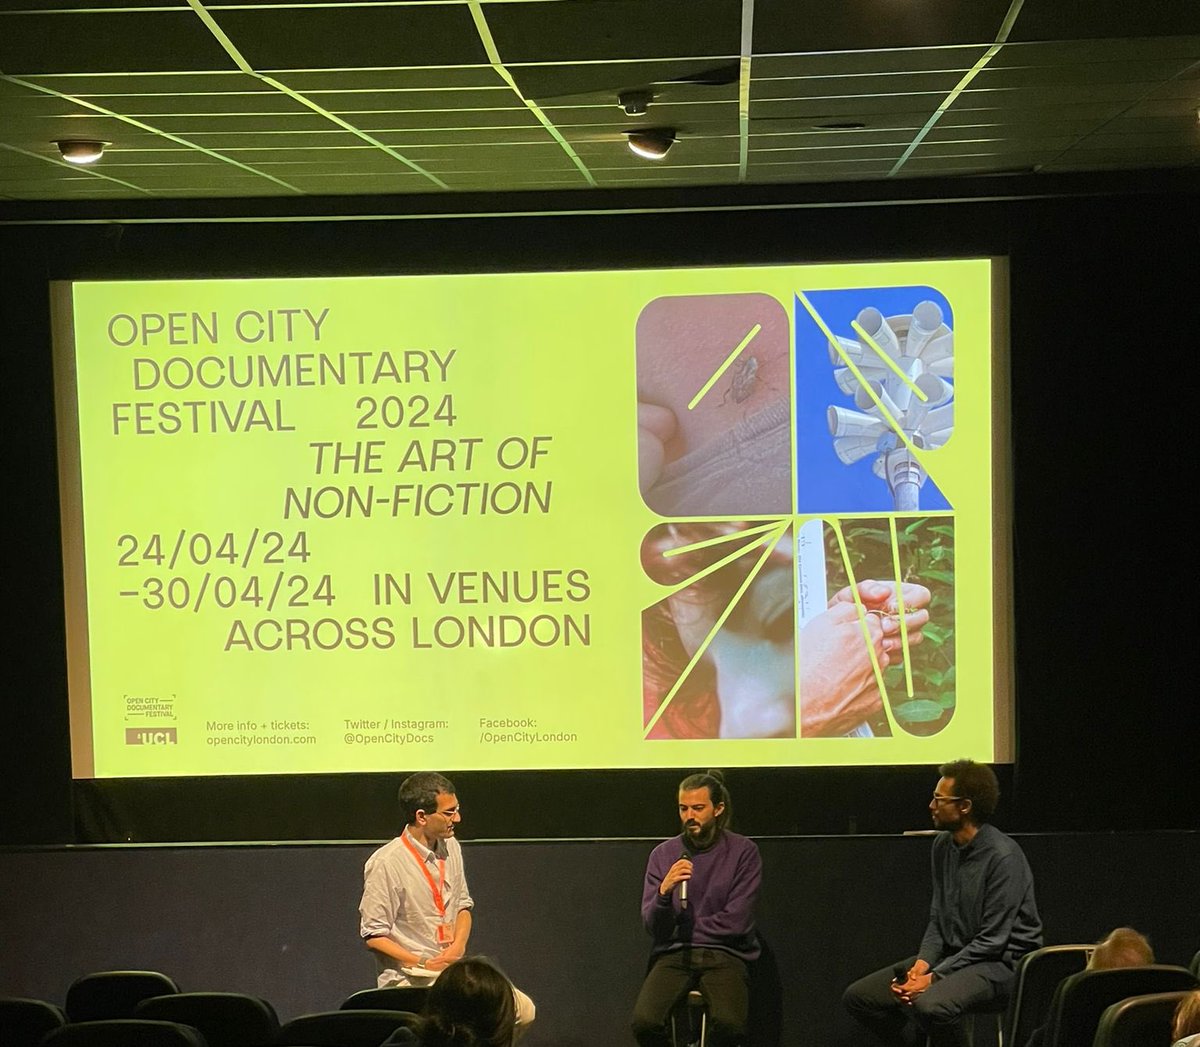 Saturday at Open City saw: 1️⃣ Funding and filming first features with @TheDocSociety & Graeme Arnfield 2️⃣ Julie Morel & Annik Leroy’s LA FORCE DIAGONALE 3️⃣ Folk Memory Project 2: MOUNTAIN VILLAGE 4️⃣ 315 & ARTISTES EN ZONE TROUBLÉS w/ @PositiveEast ➕ much more!